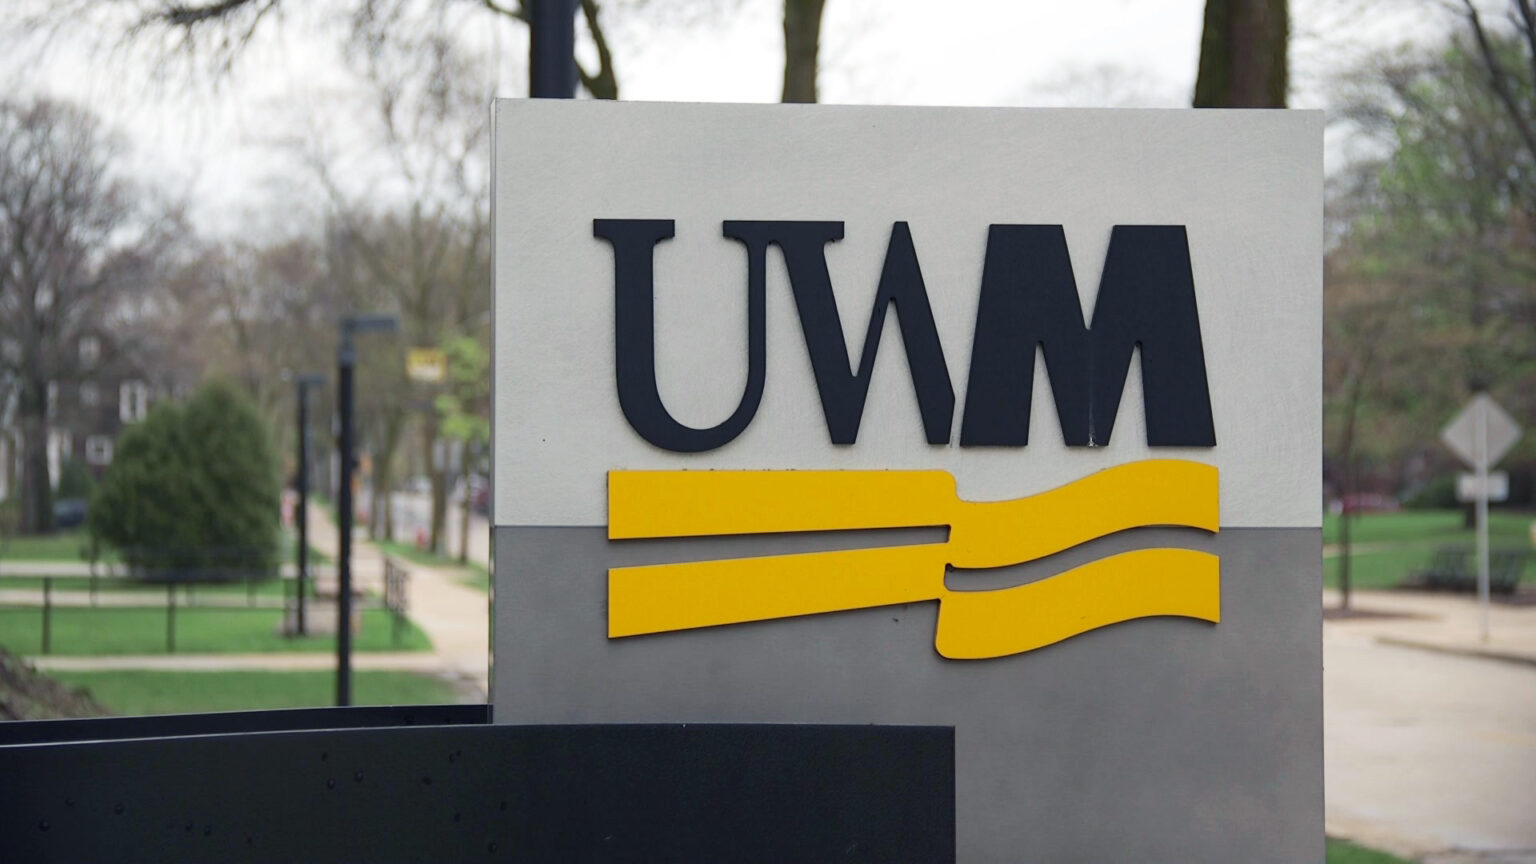 A sign with a UWM wordmark stands next to a road, with trees, buildings and sidewalks in the background.